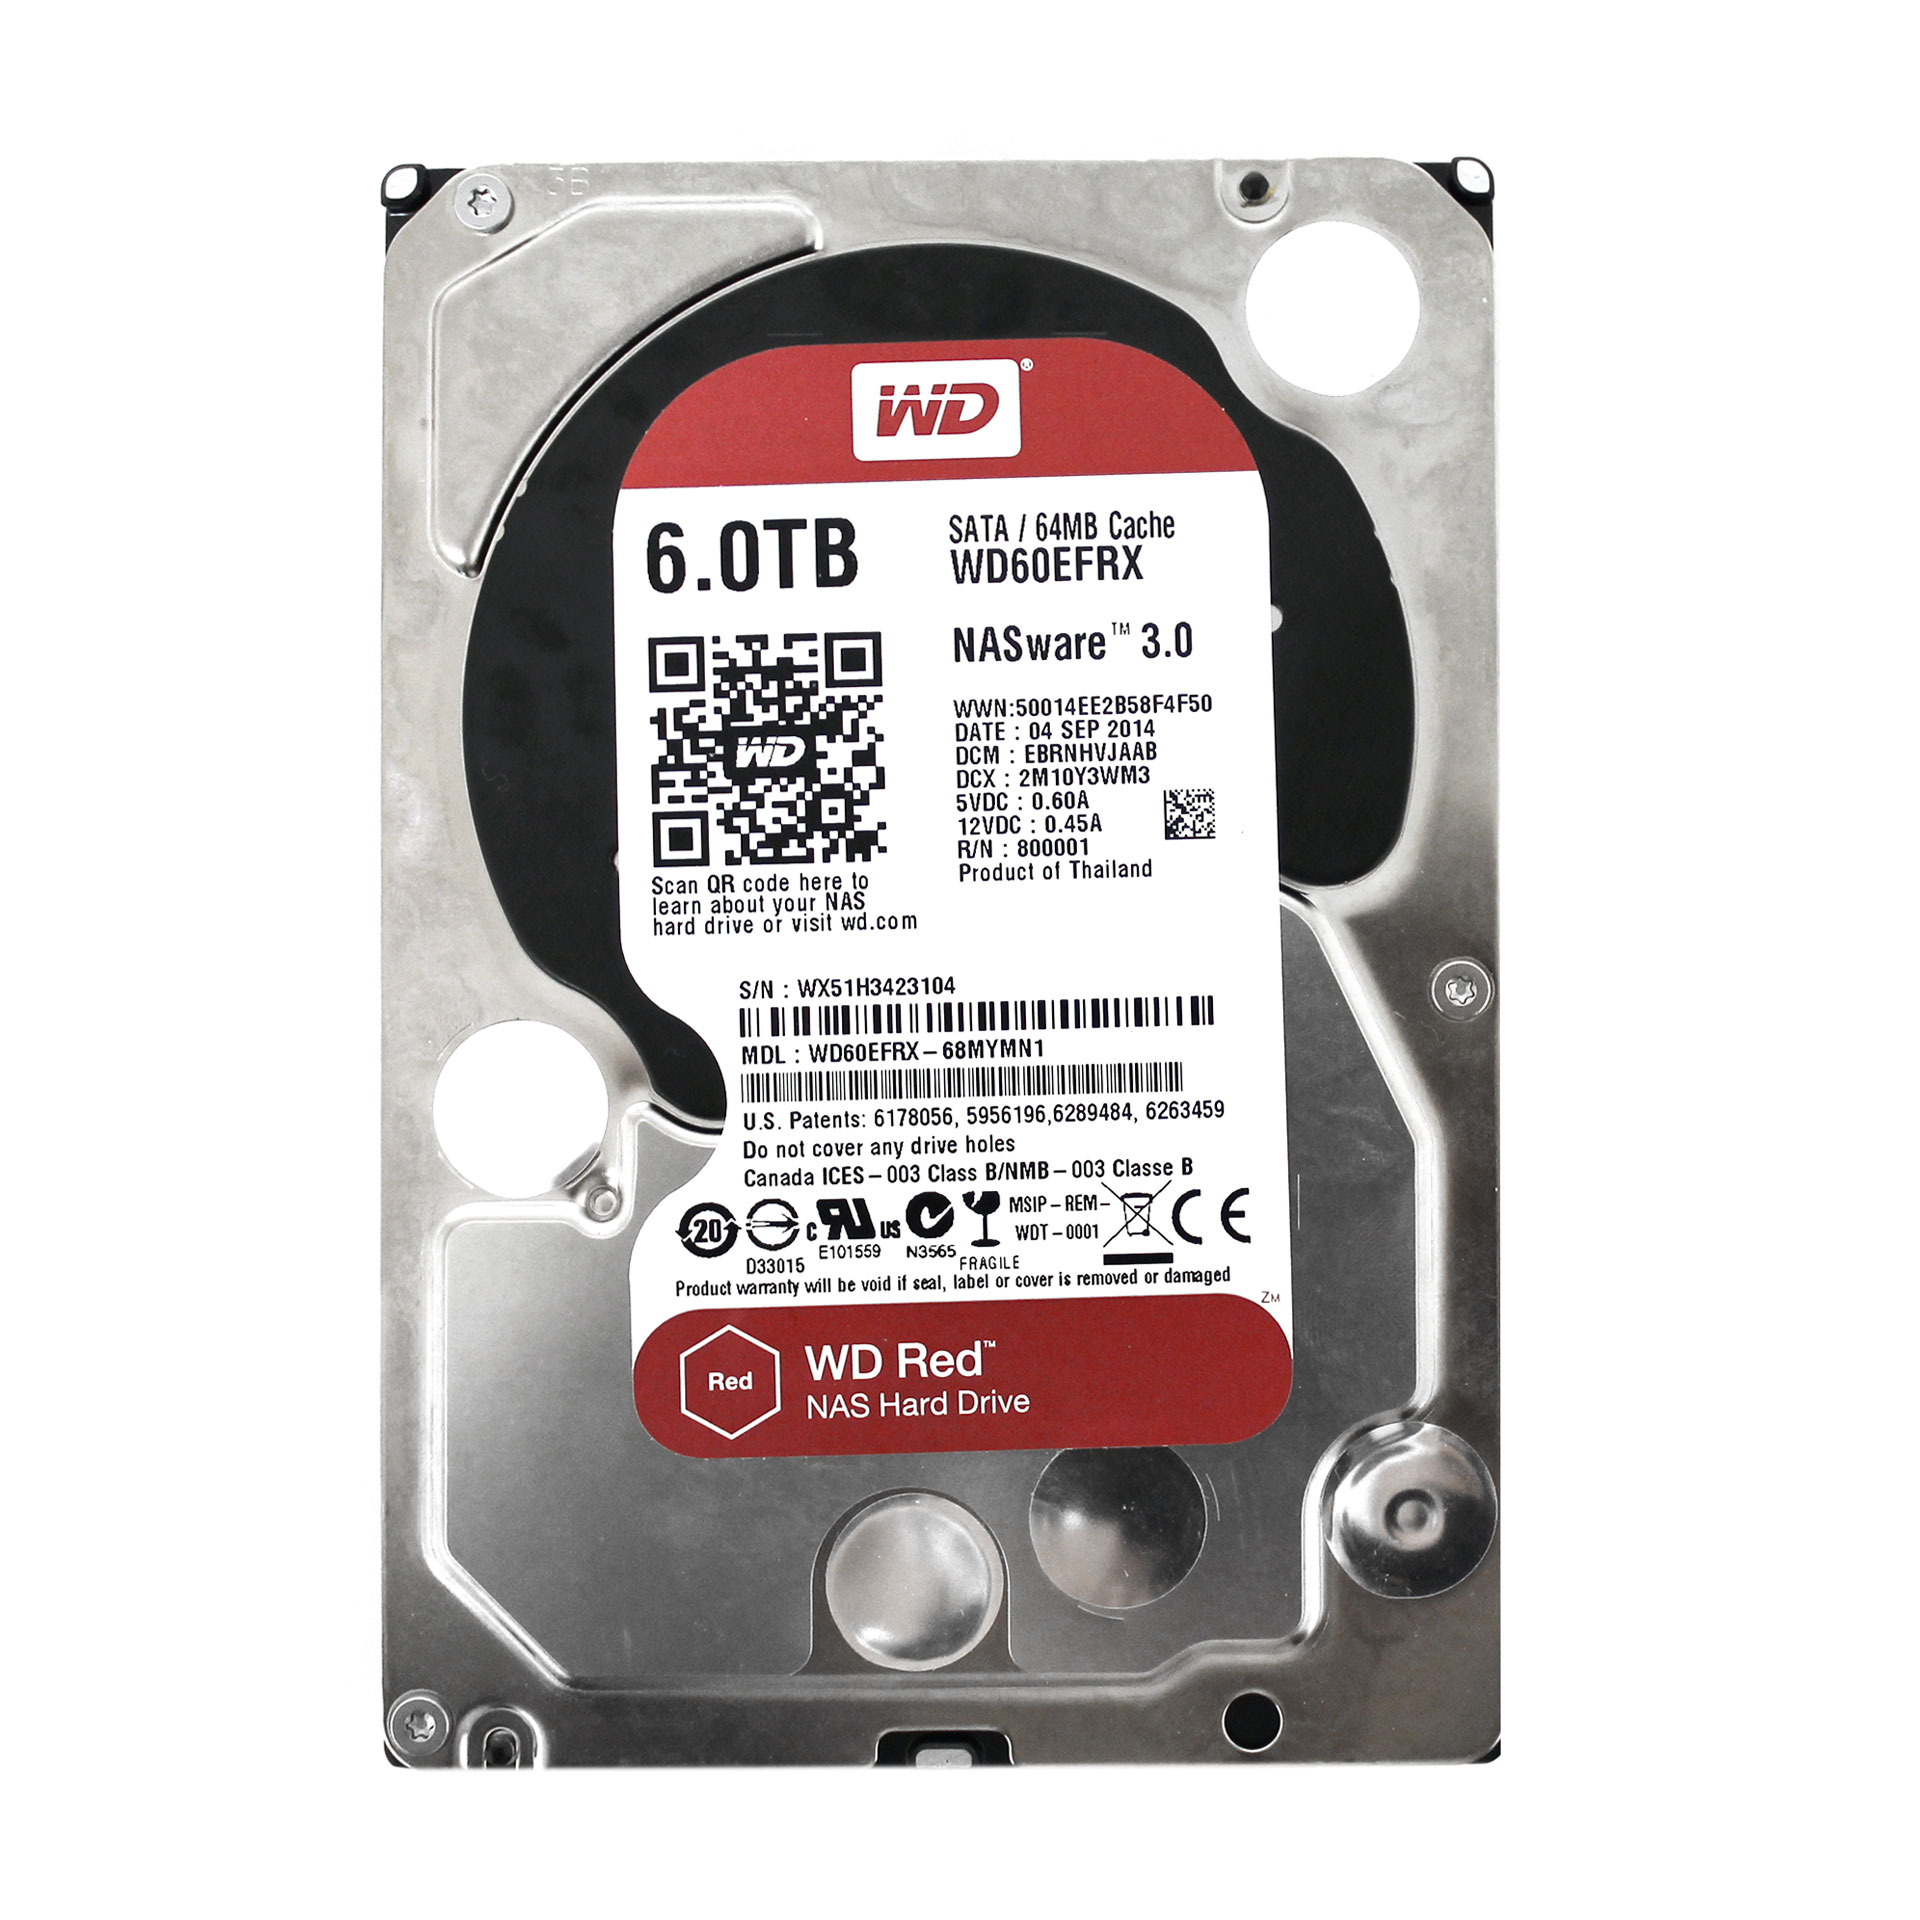 WD Red 6TB WD60EFRX NAS 5400 RPM SATA 6Gb/s 3.5" Hard Drive